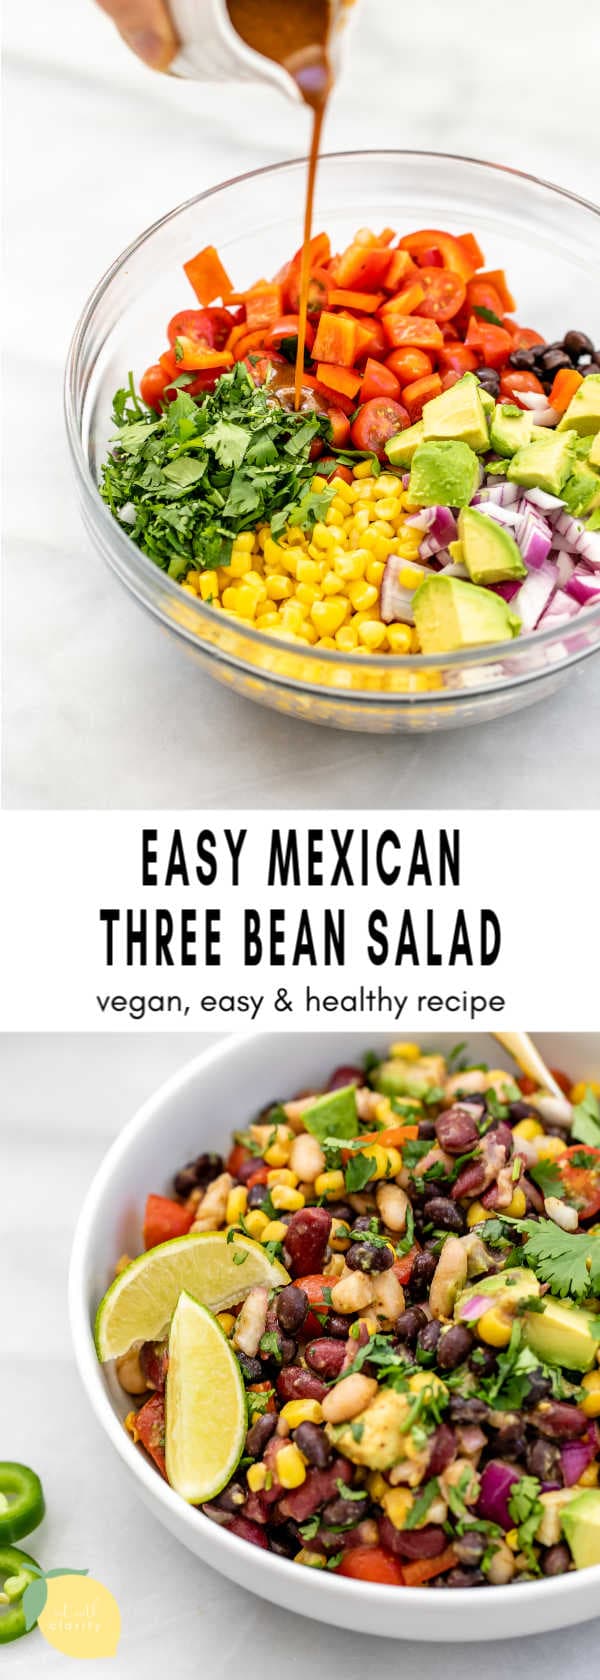 Mexican Inspired Three Bean Salad | Eat With Clarity Sides